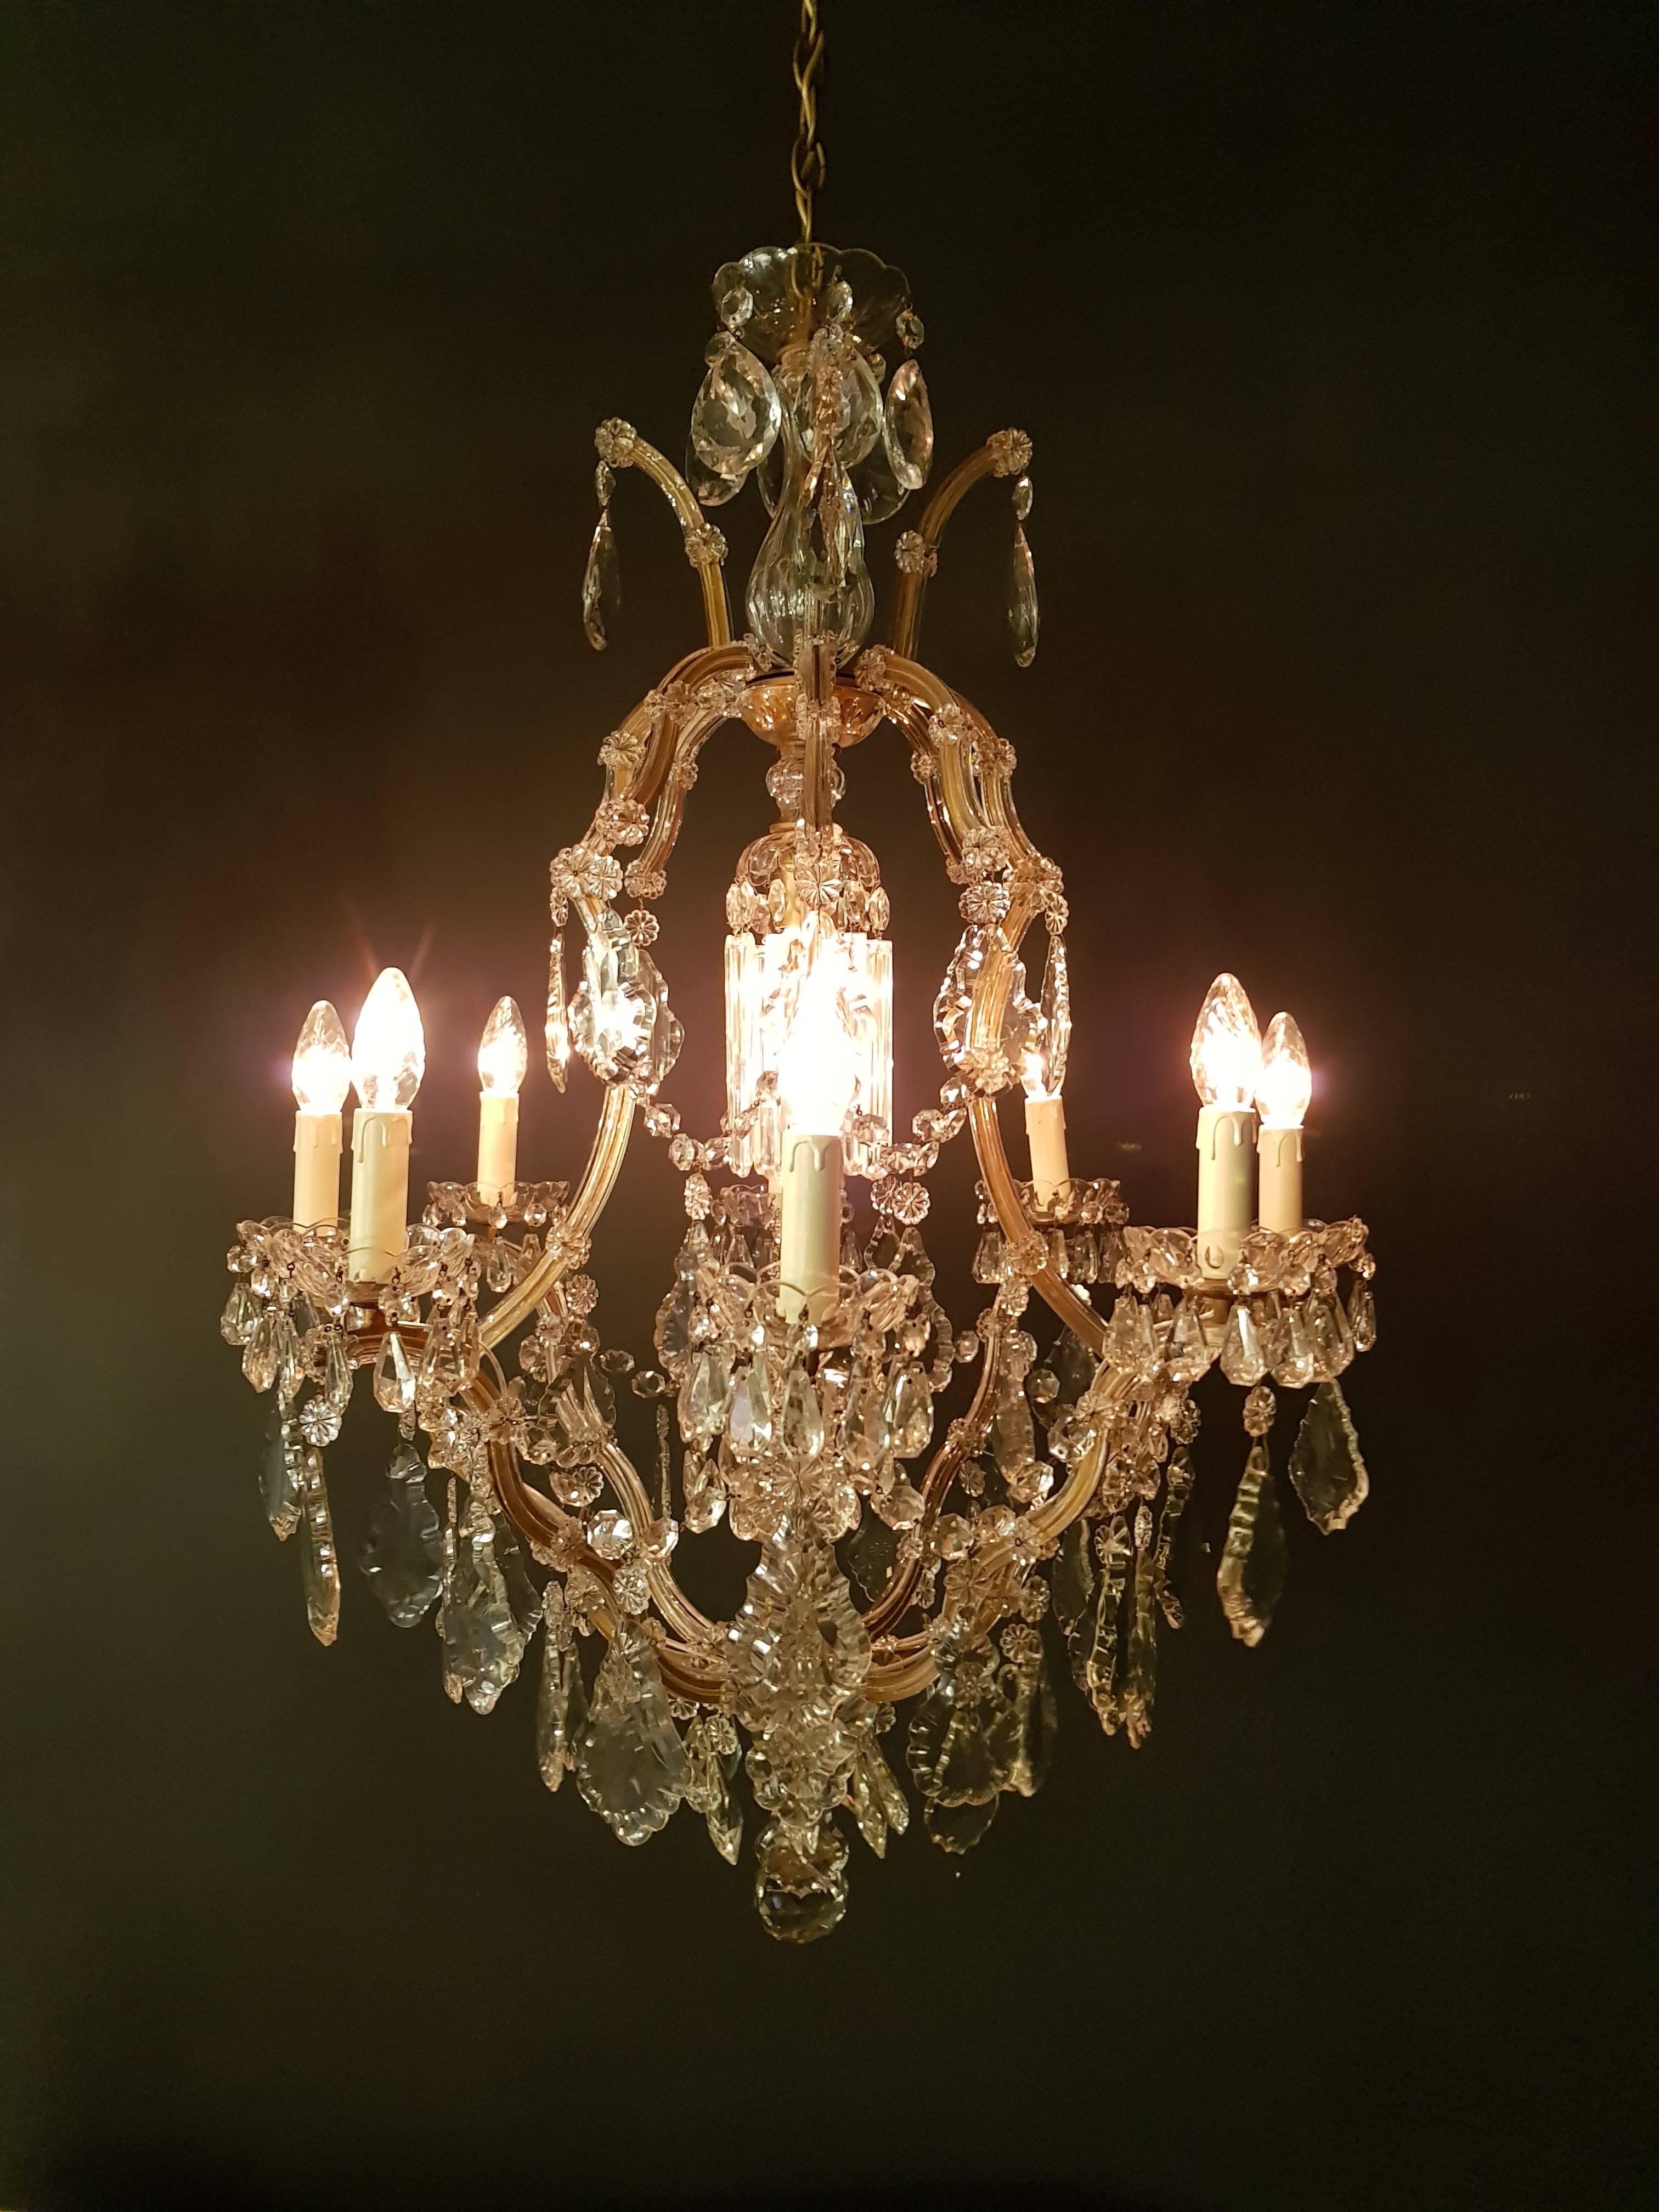 Austrian Maria Theresa Crystal Chandelier Antique Ceiling Lamp Lustre